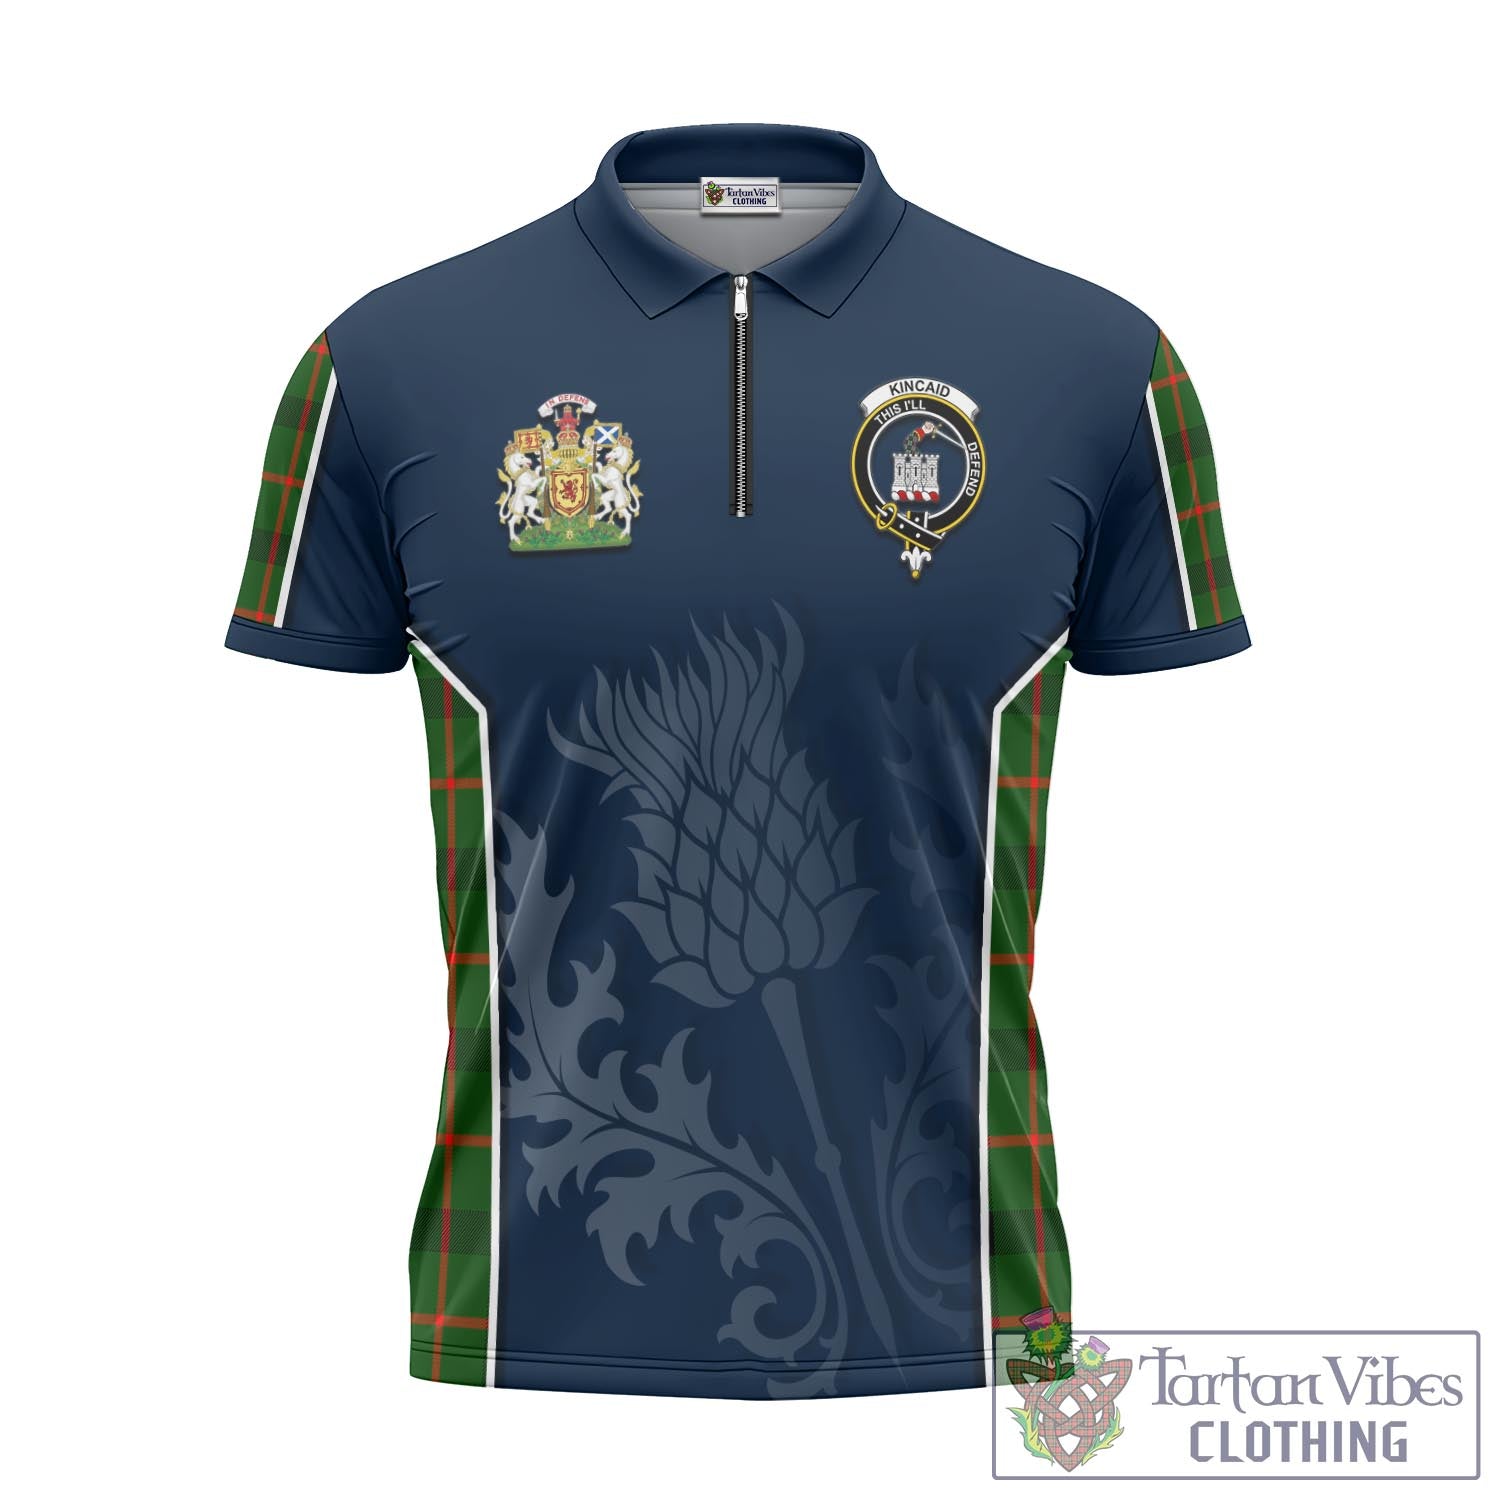 Tartan Vibes Clothing Kincaid Modern Tartan Zipper Polo Shirt with Family Crest and Scottish Thistle Vibes Sport Style